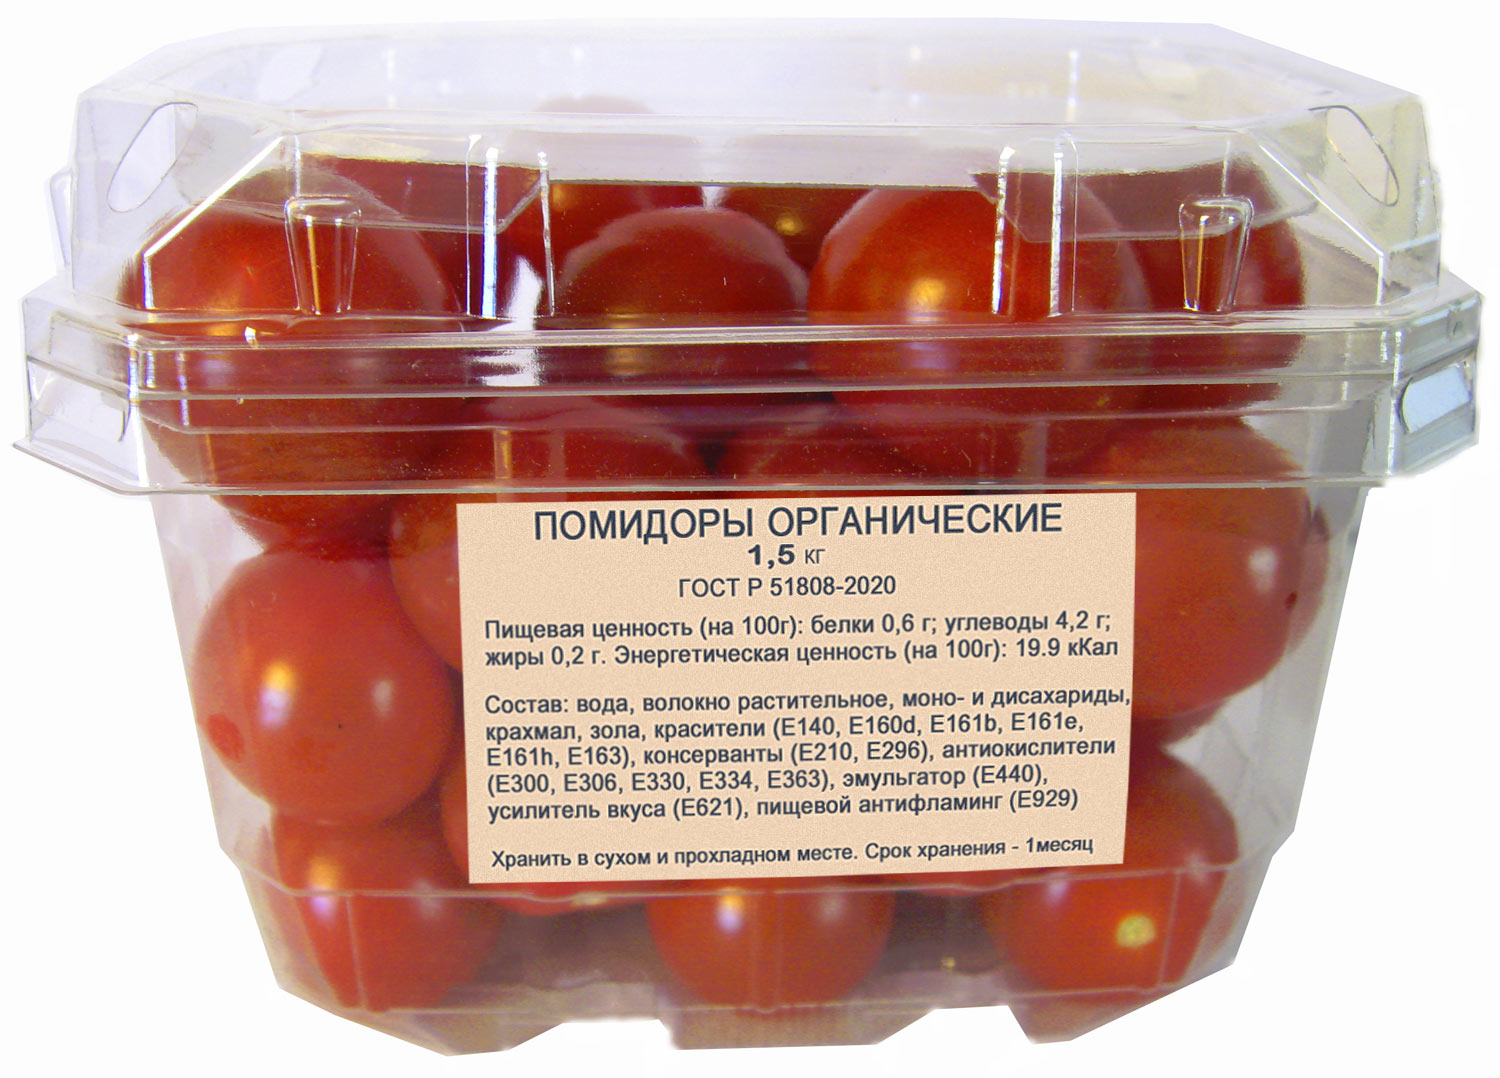 organoc tomatoes with food additives